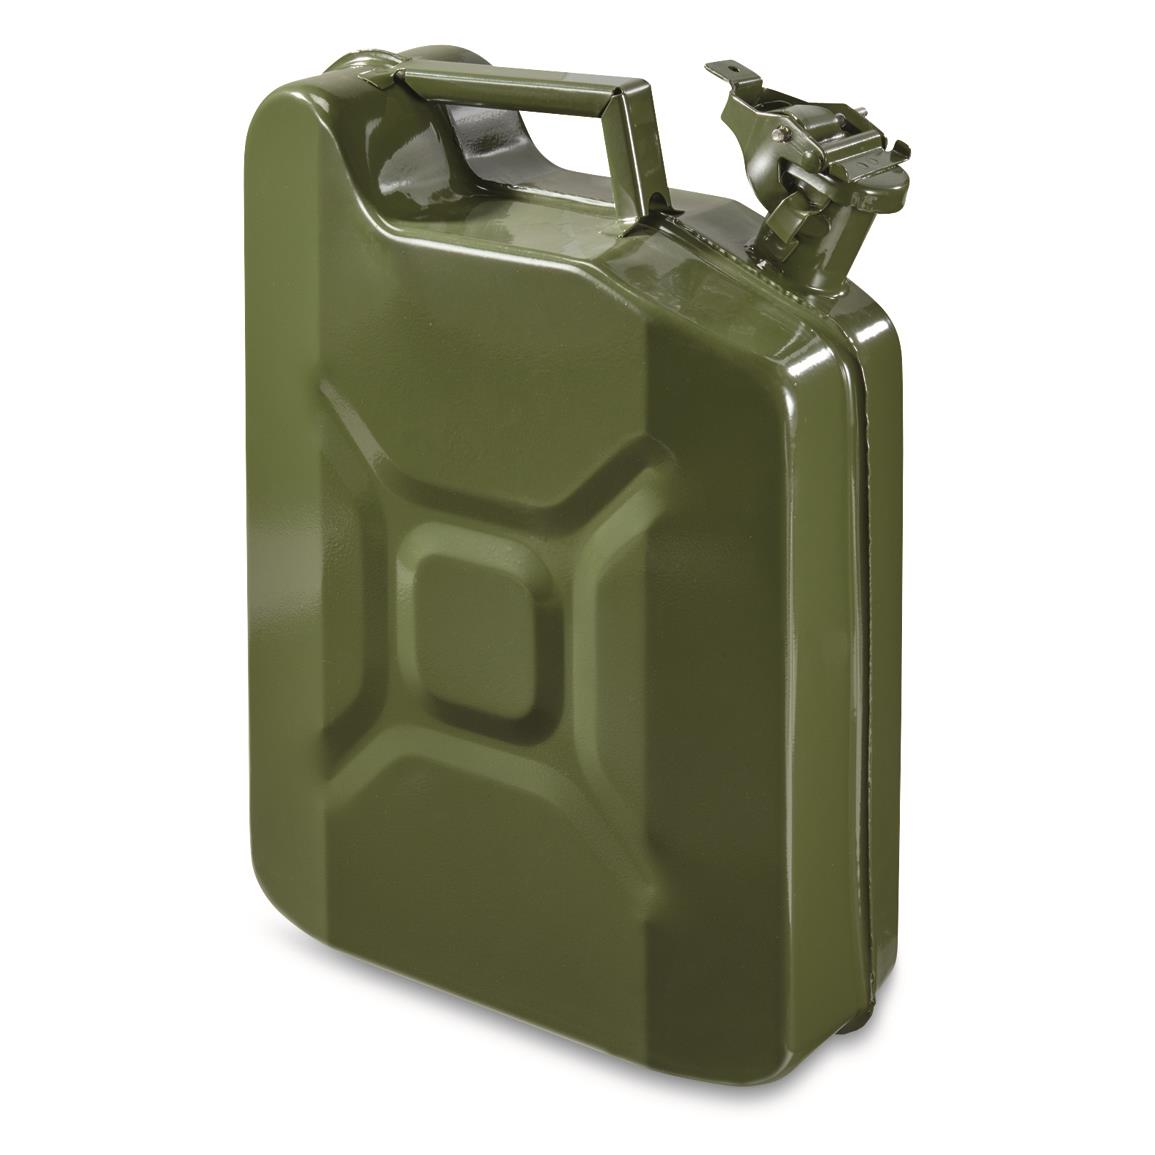 U.S. Military Style Reproduction Jerry Can, 10 Liter (2.5 Gallon)